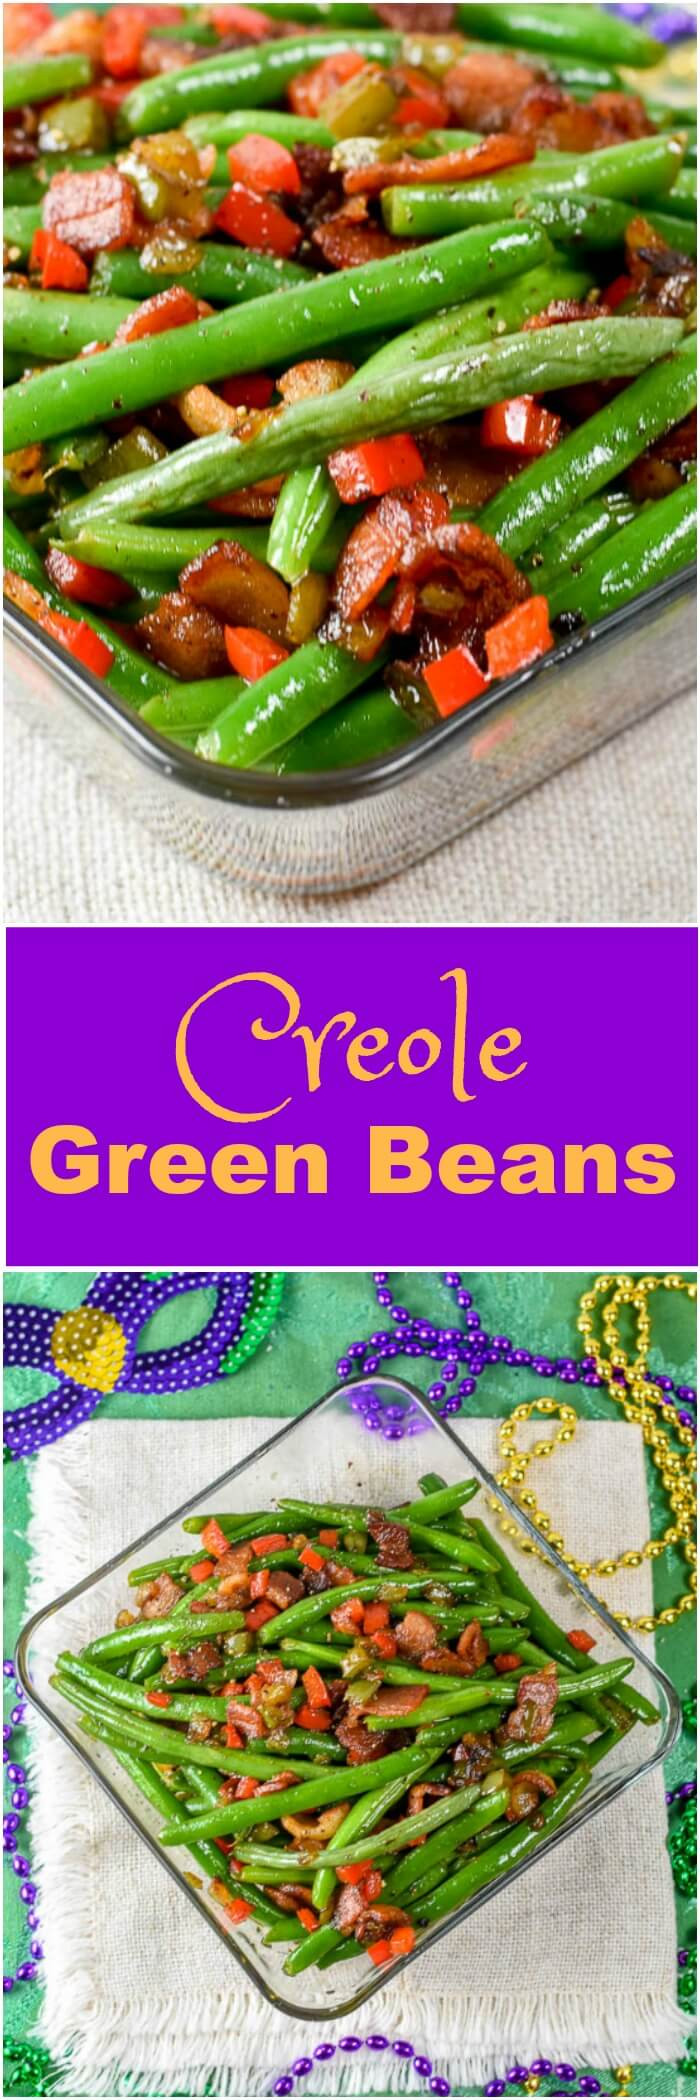 Mardi Gras Side Dishes
 Creole Green Beans Flavor Mosaic